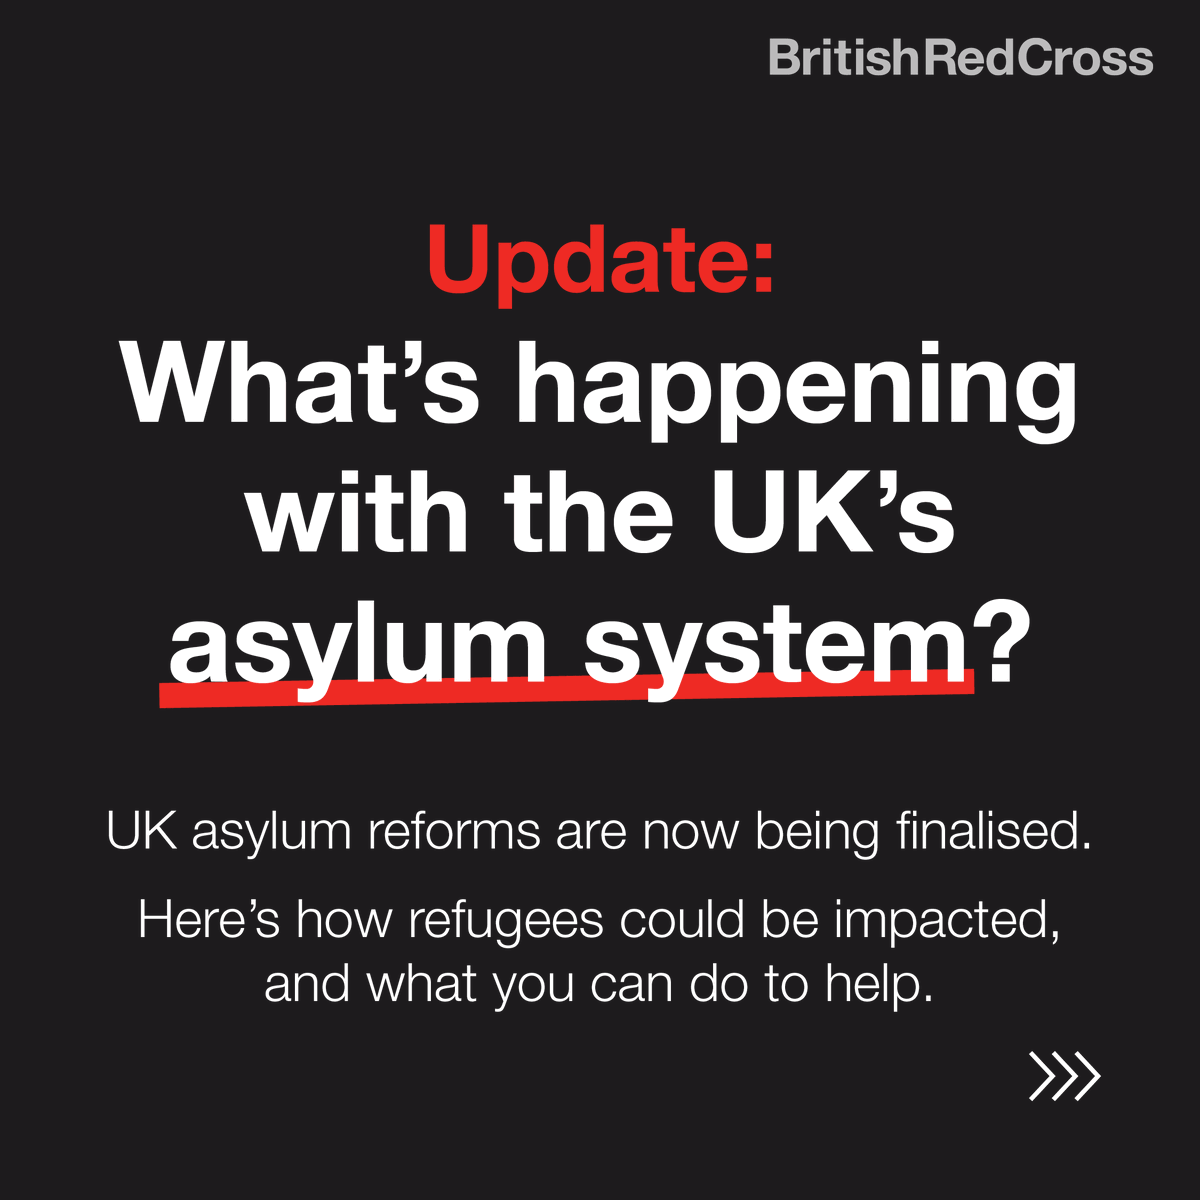 Confused by what's happening with the UK's asylum system? The proposed changes being debated could be devastating for those fleeing their homes and seeking safety. Scroll down to find out what the impact on refugees could be and how you can show your support. ⬇️